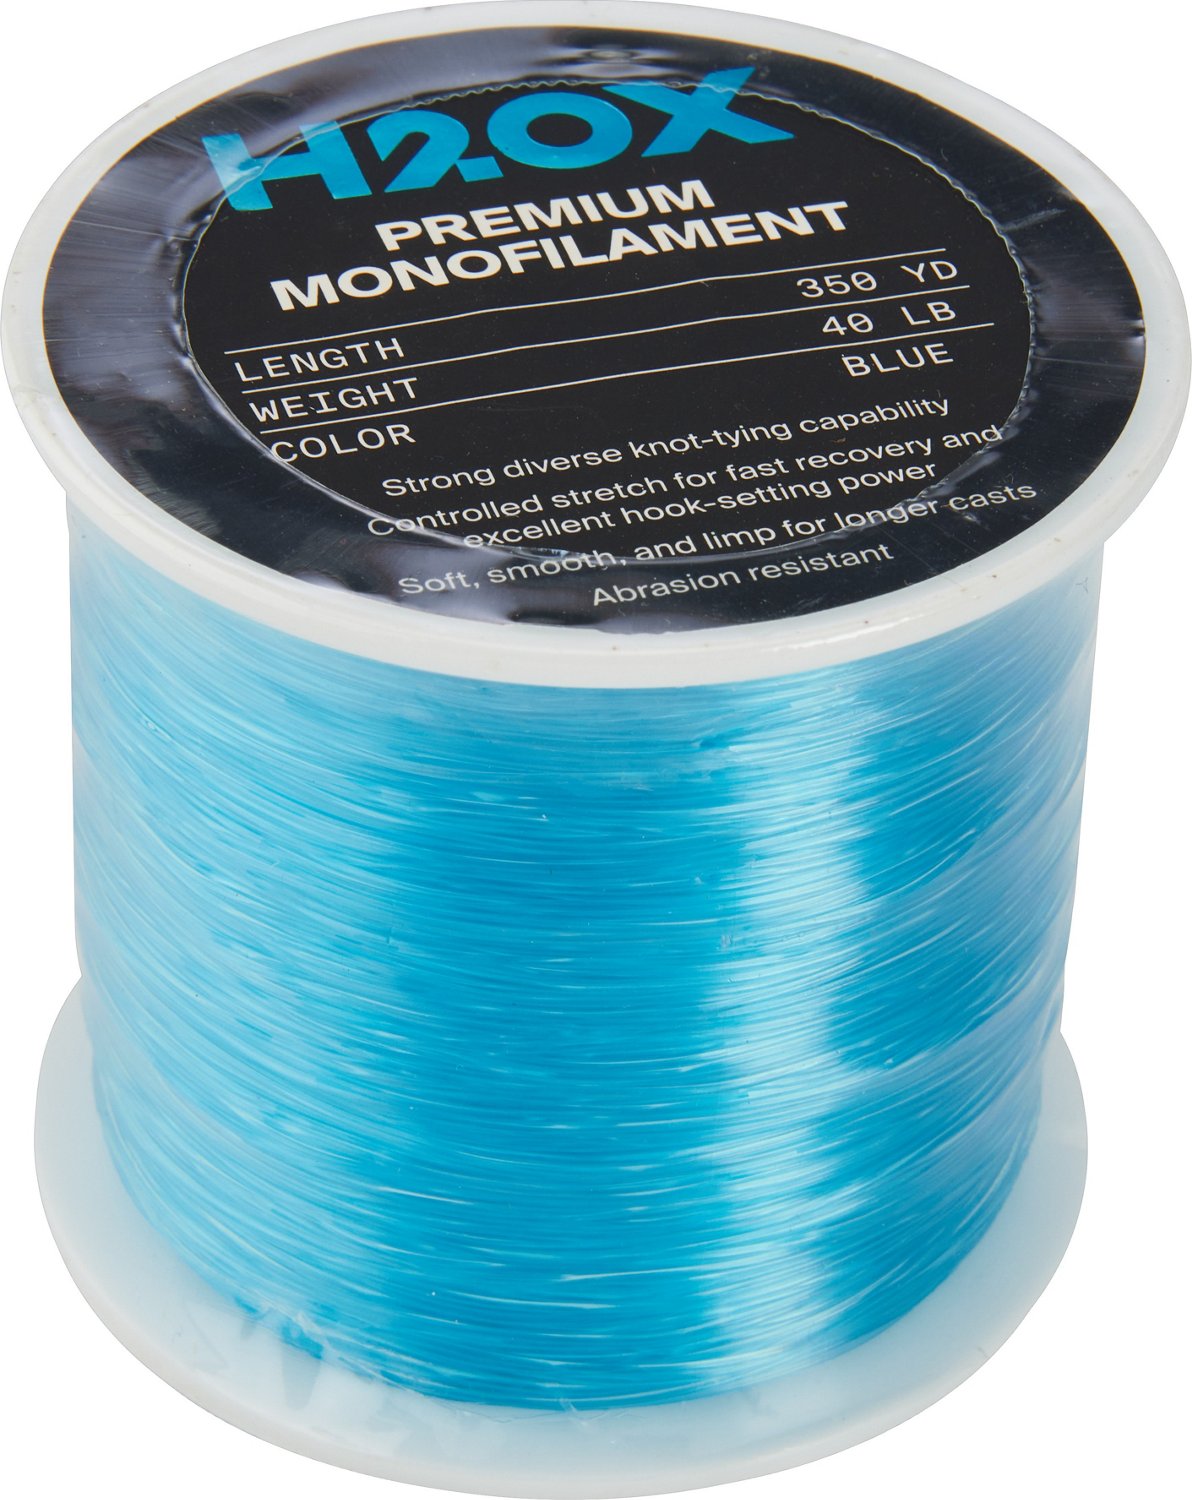 Academy Sports + Outdoors H2OX 1/4 lb Monofilament